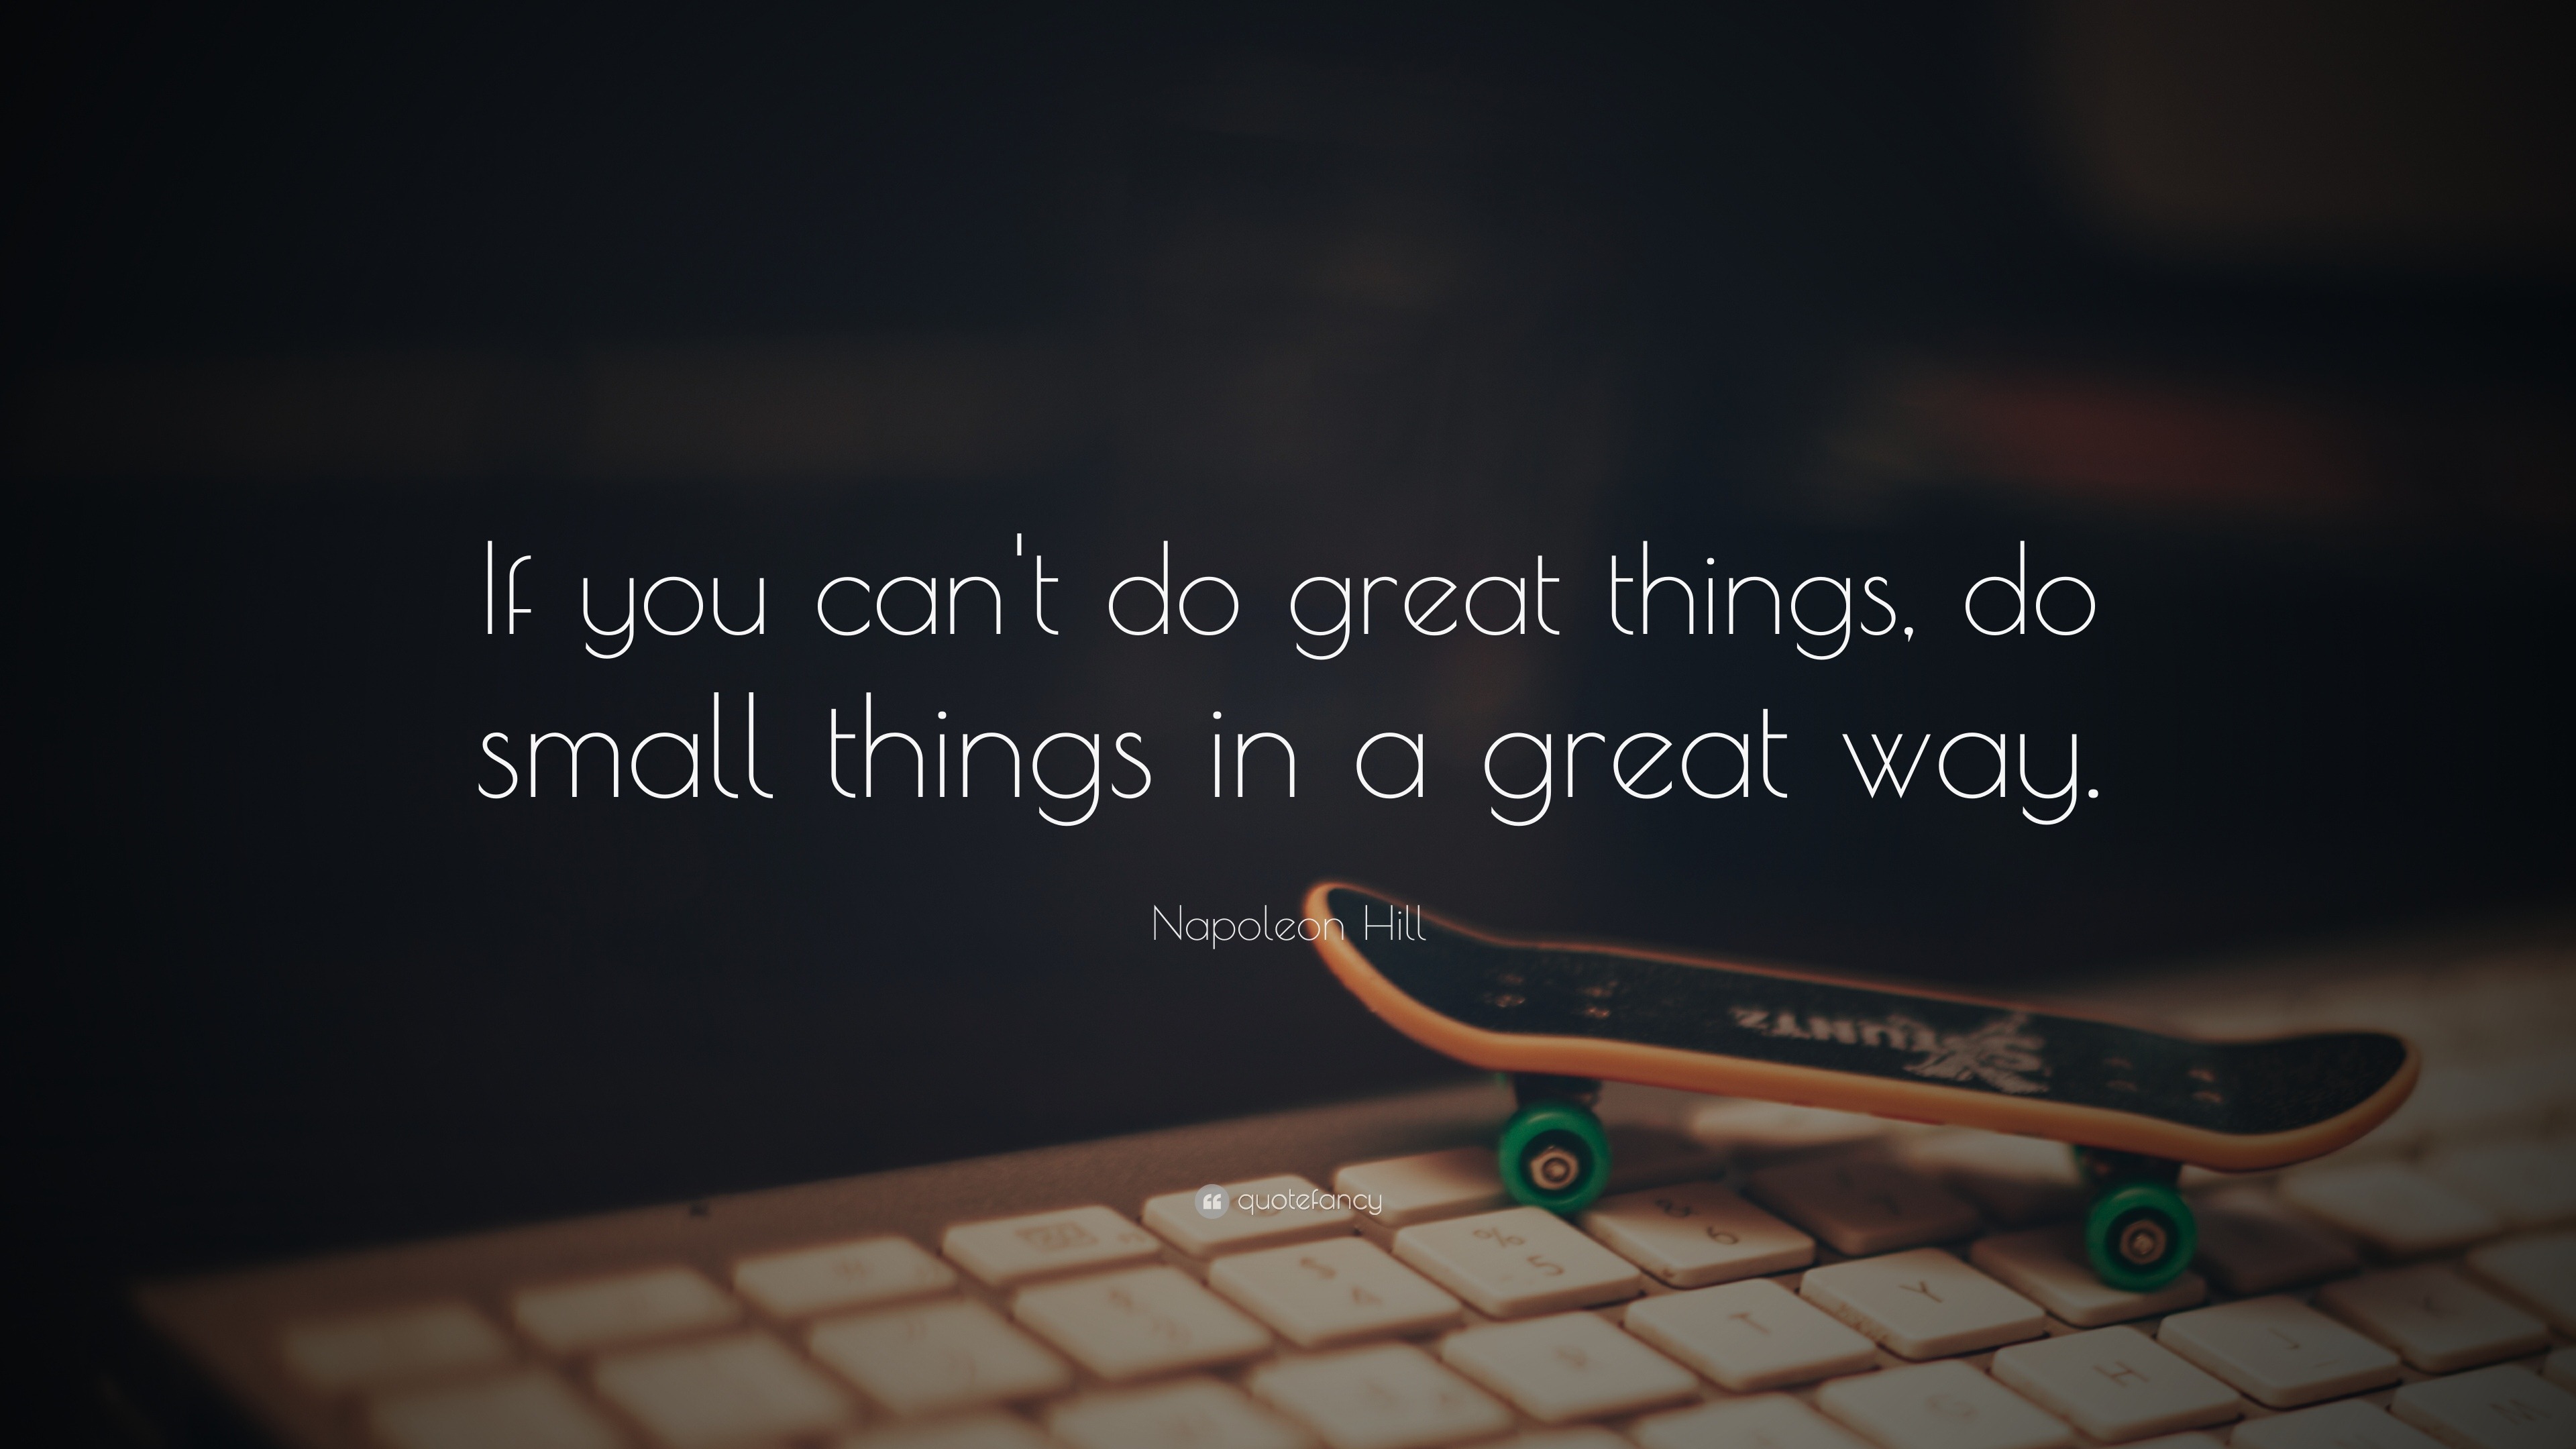 Napoleon Hill Quote: "If you can't do great things, do small thin...